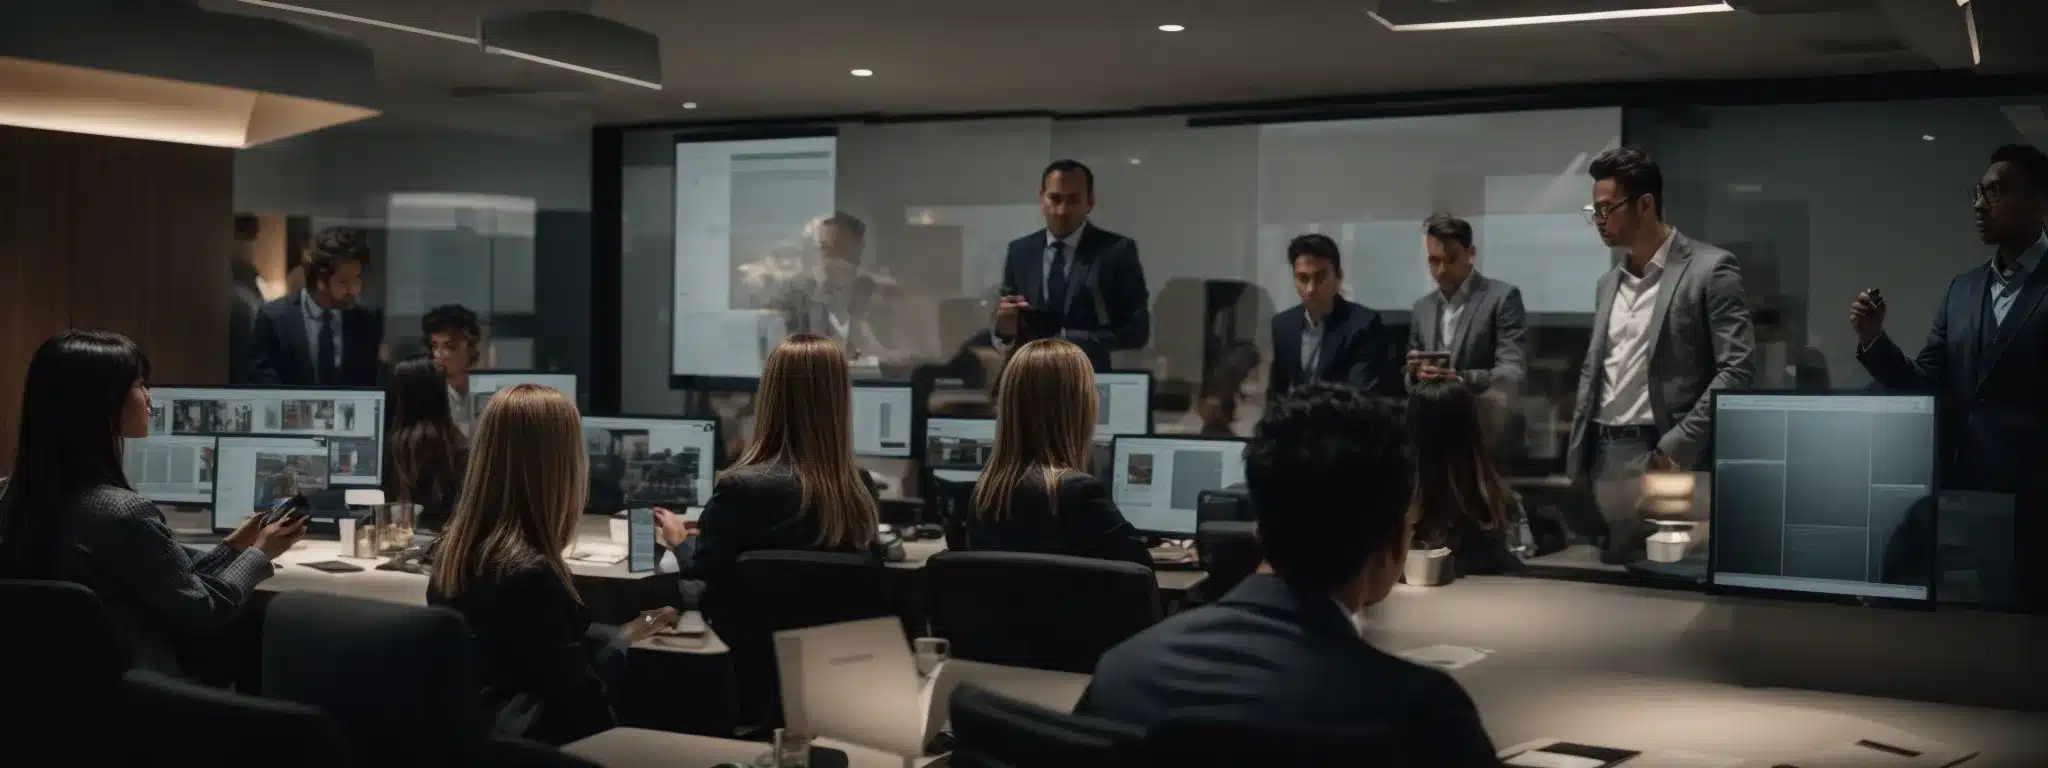 A Team Of Professionals Engages In A Strategy Session, With A Digital Marketing Campaign Being Projected On The Screen In A Modern Office.